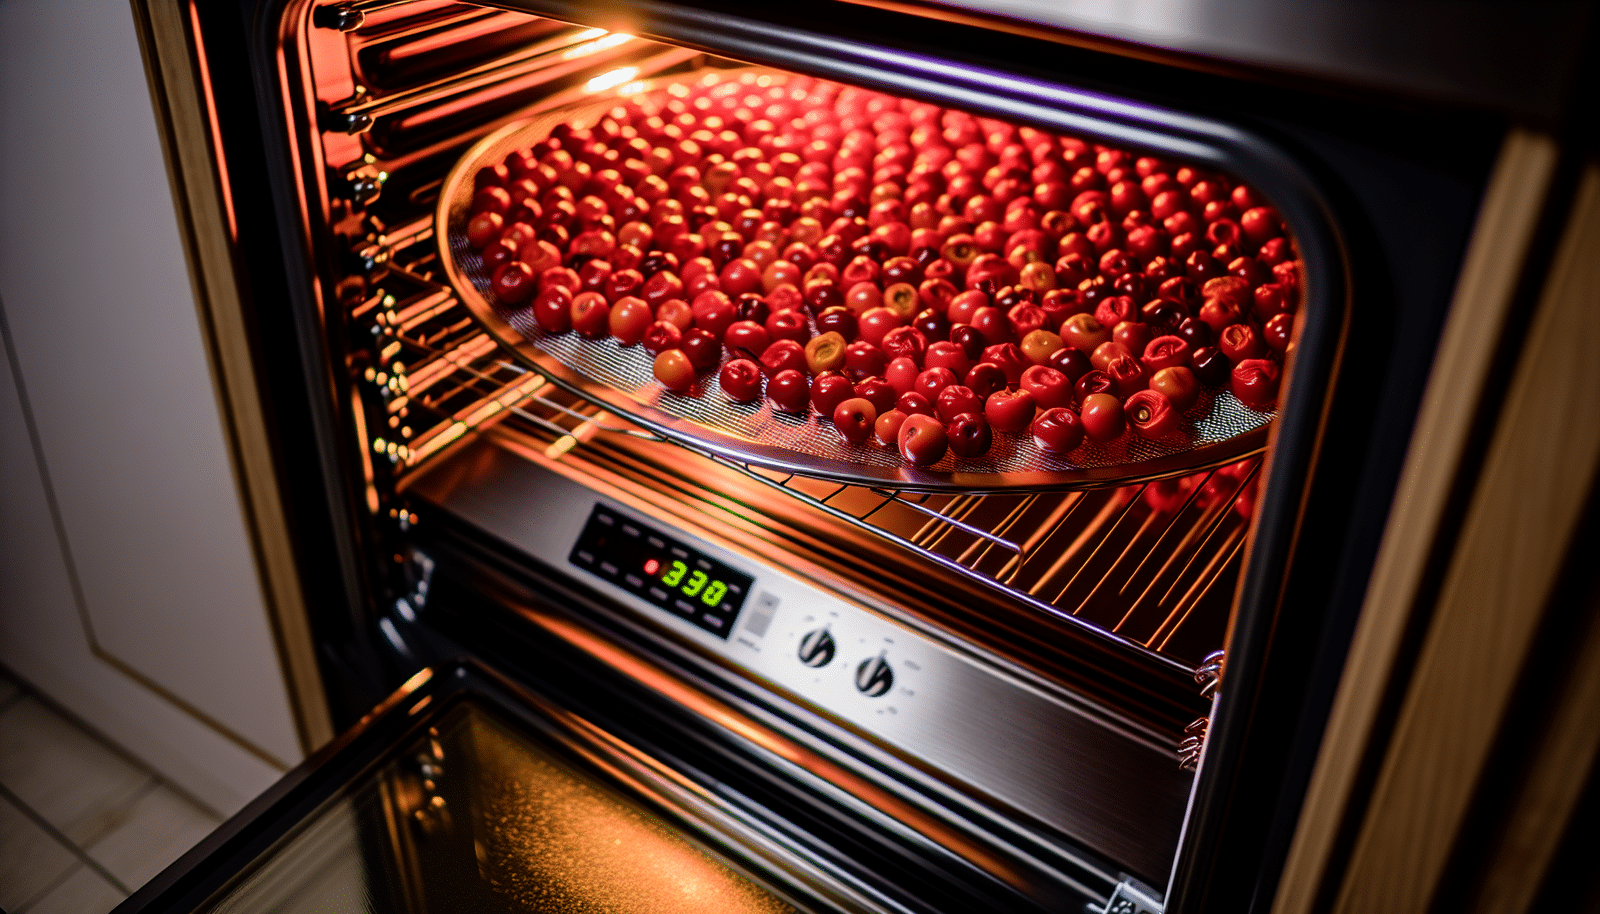 Oven with cherries inside undergoing the drying process